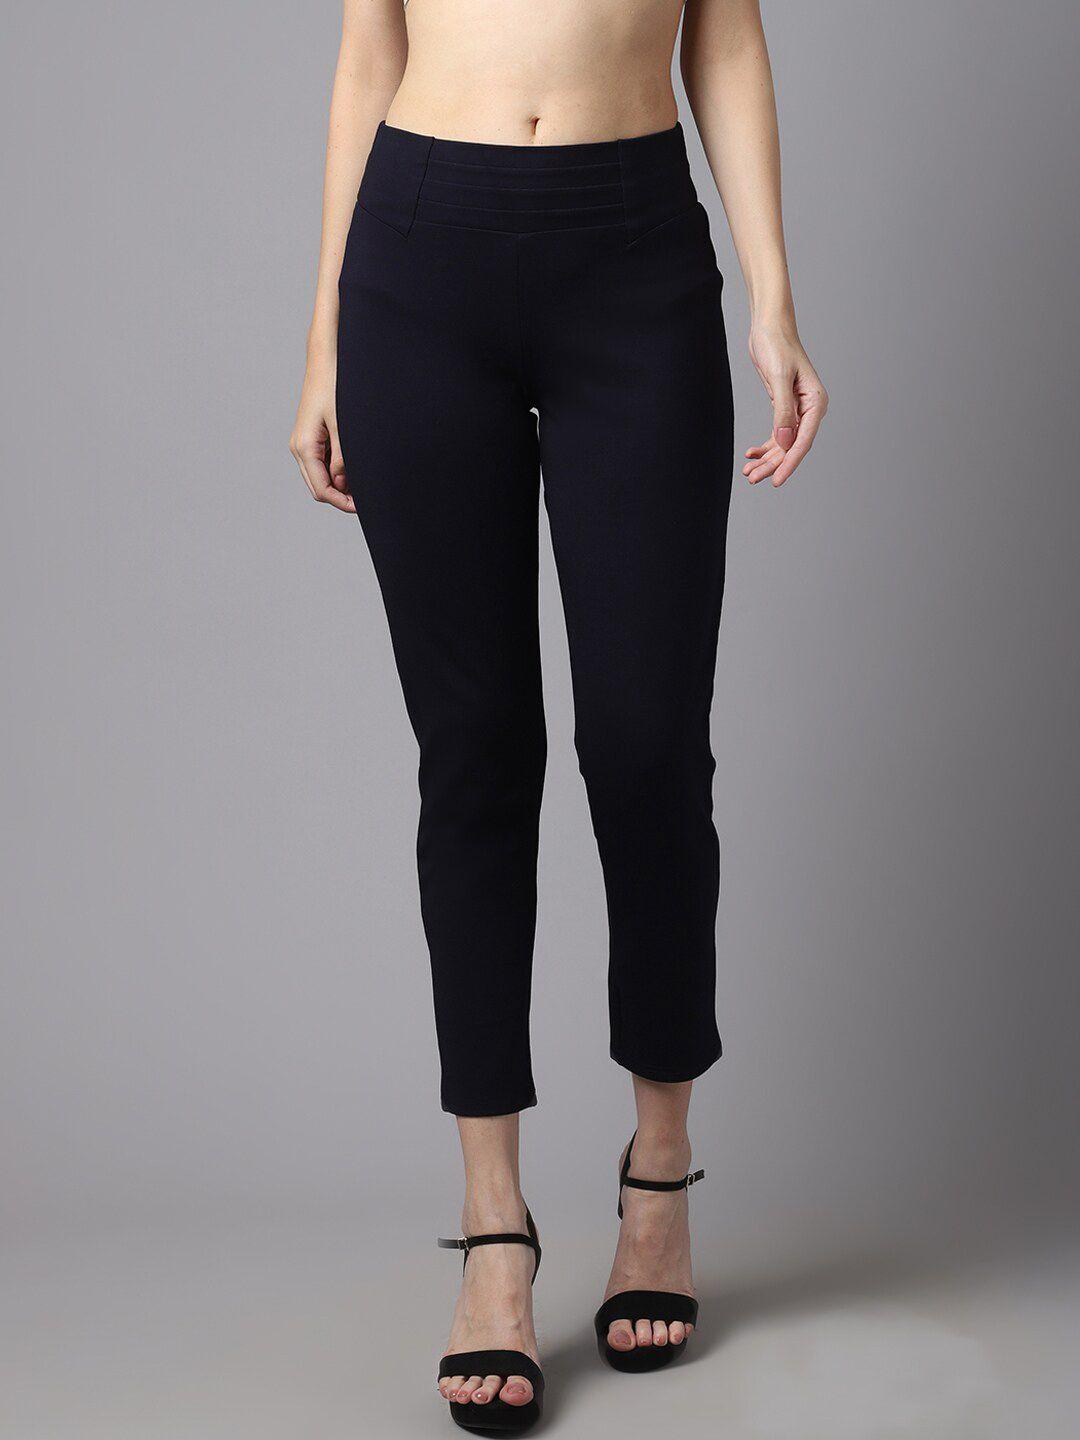 cantabil-women-black-solid-cotton-jeggings